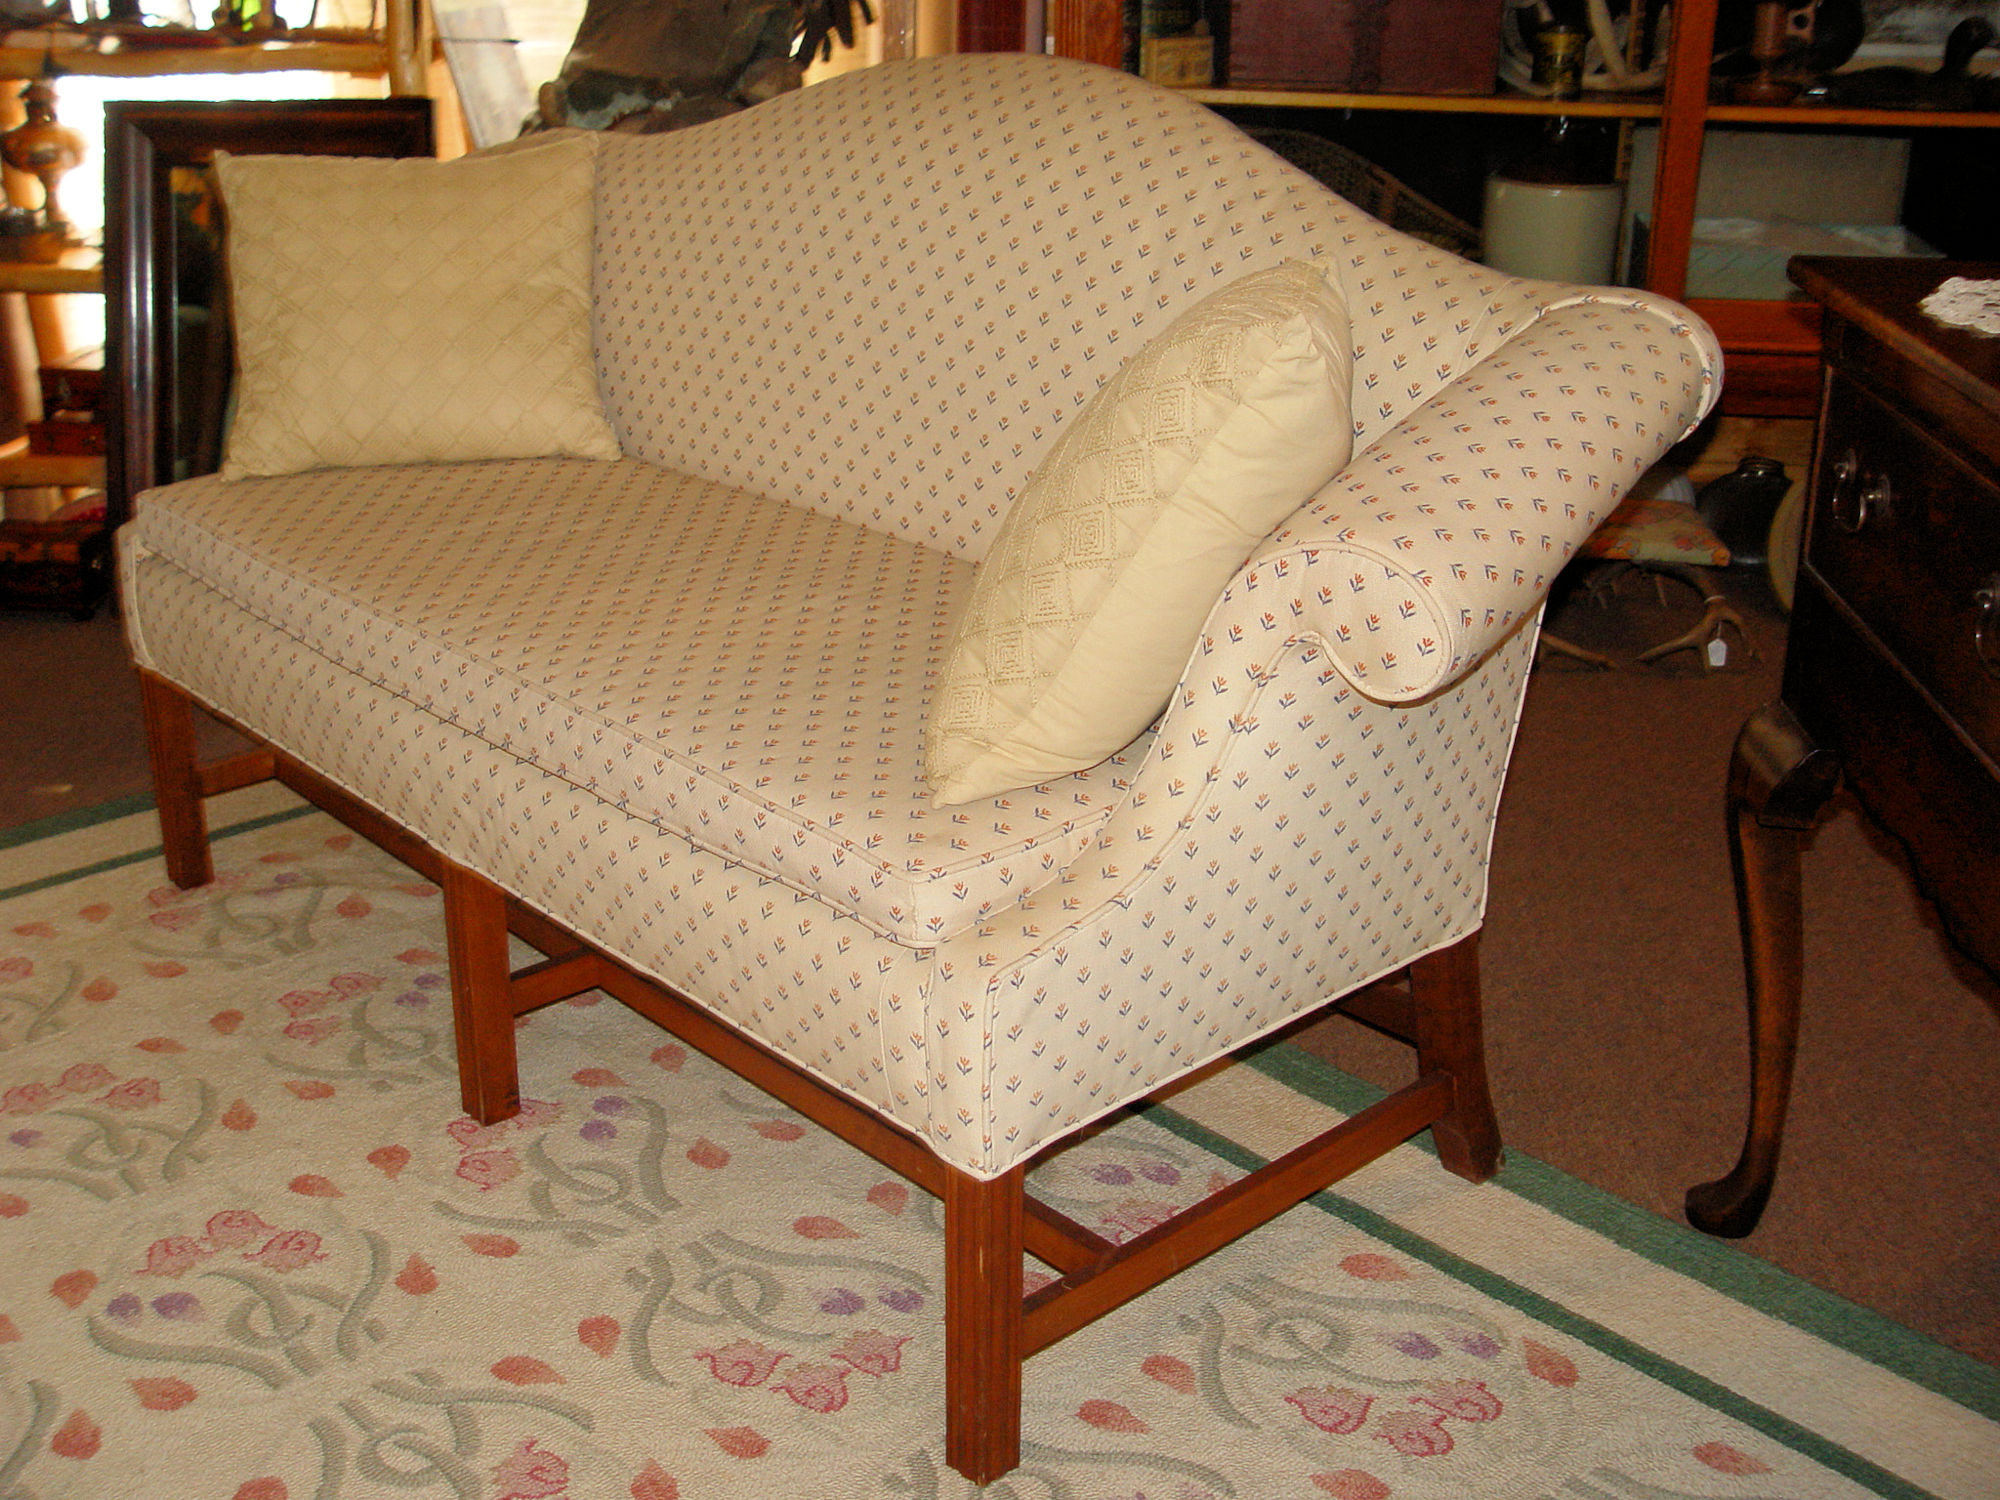 Early American
                        Camelback Sofa, Vintage Chippendale Style